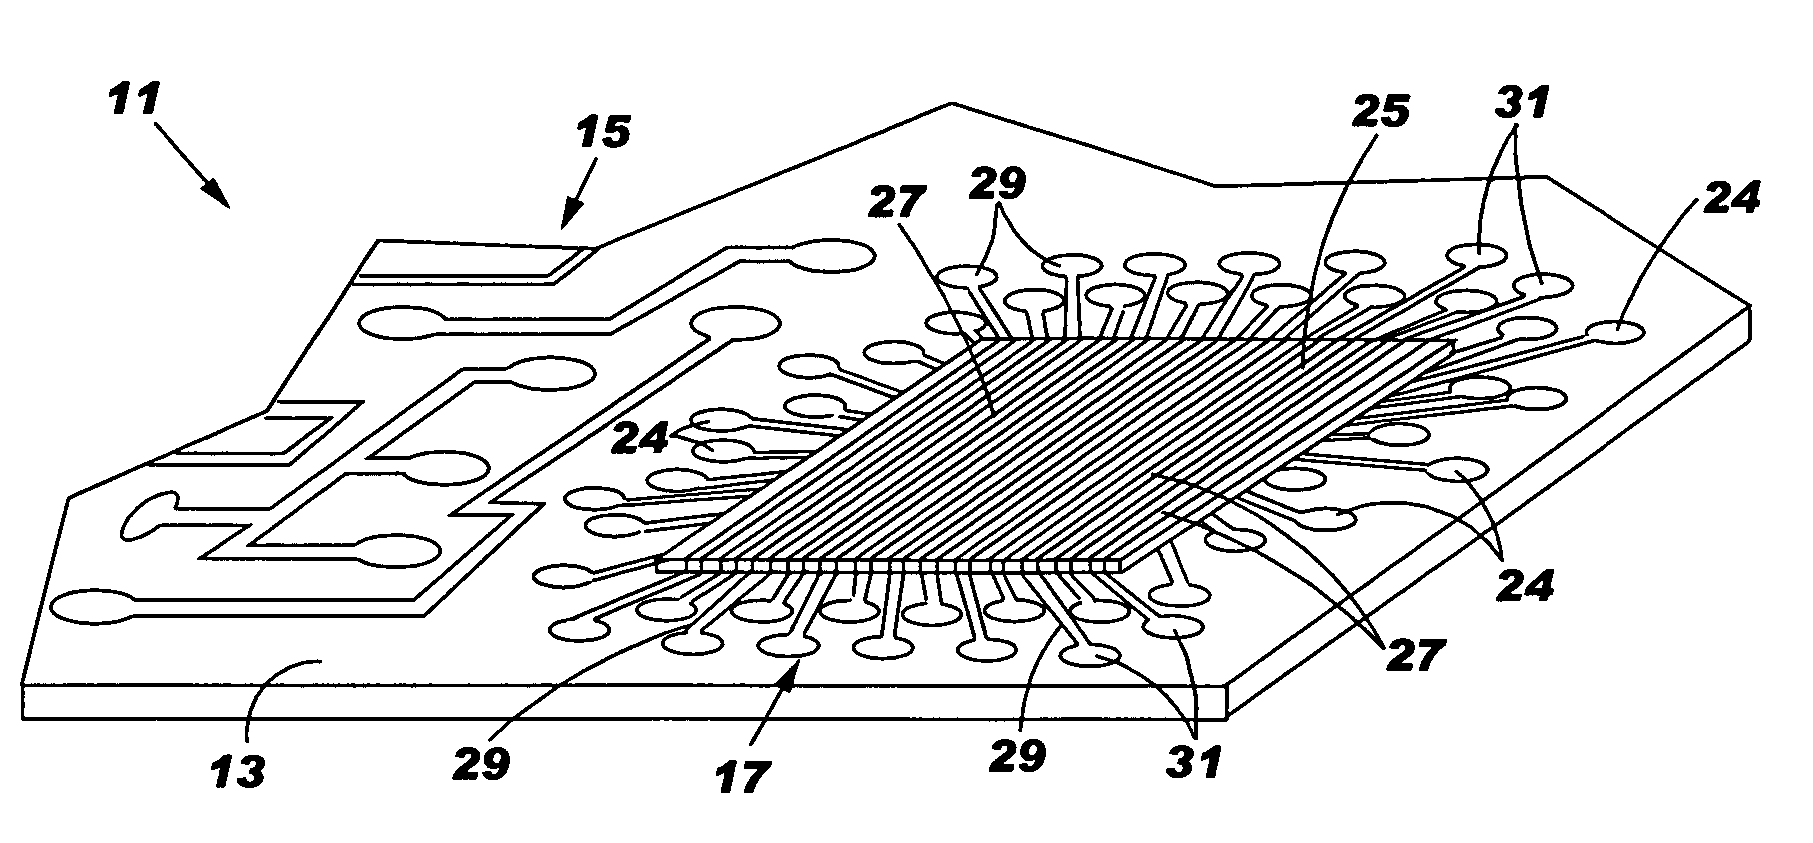 Electrical assembly with internal memory circuitized substrate having electronic components positioned thereon, method of making same, and information handling system utilizing same